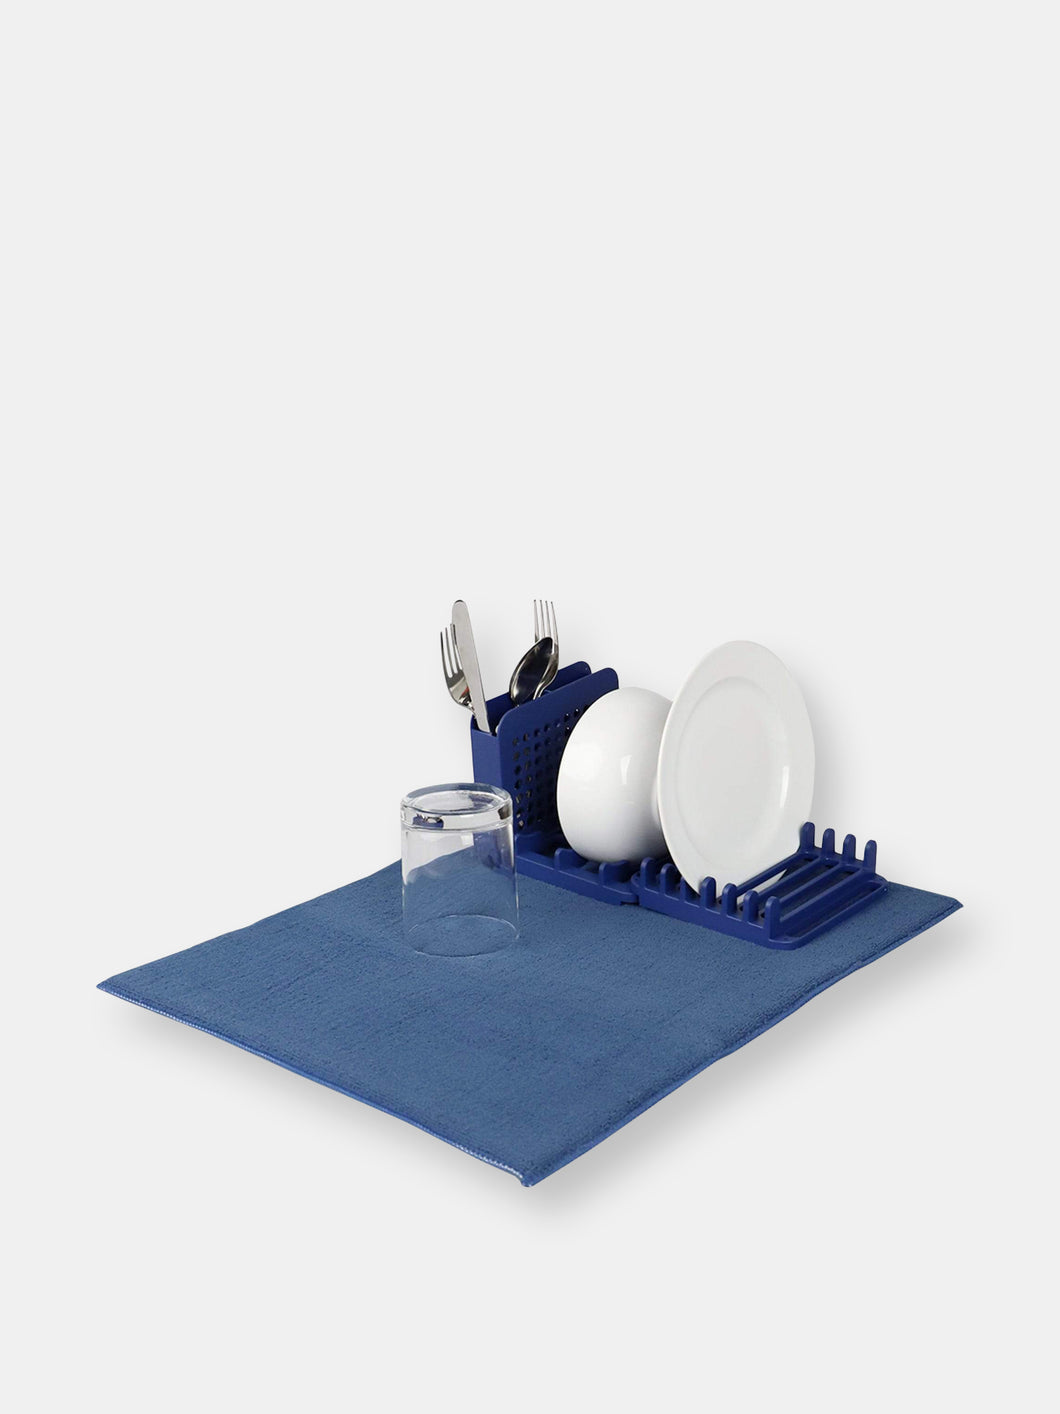 Michael Graves Design 3 Section Plastic  Dish Drying Rack with Super Absorbent Microfiber Mat, Indigo